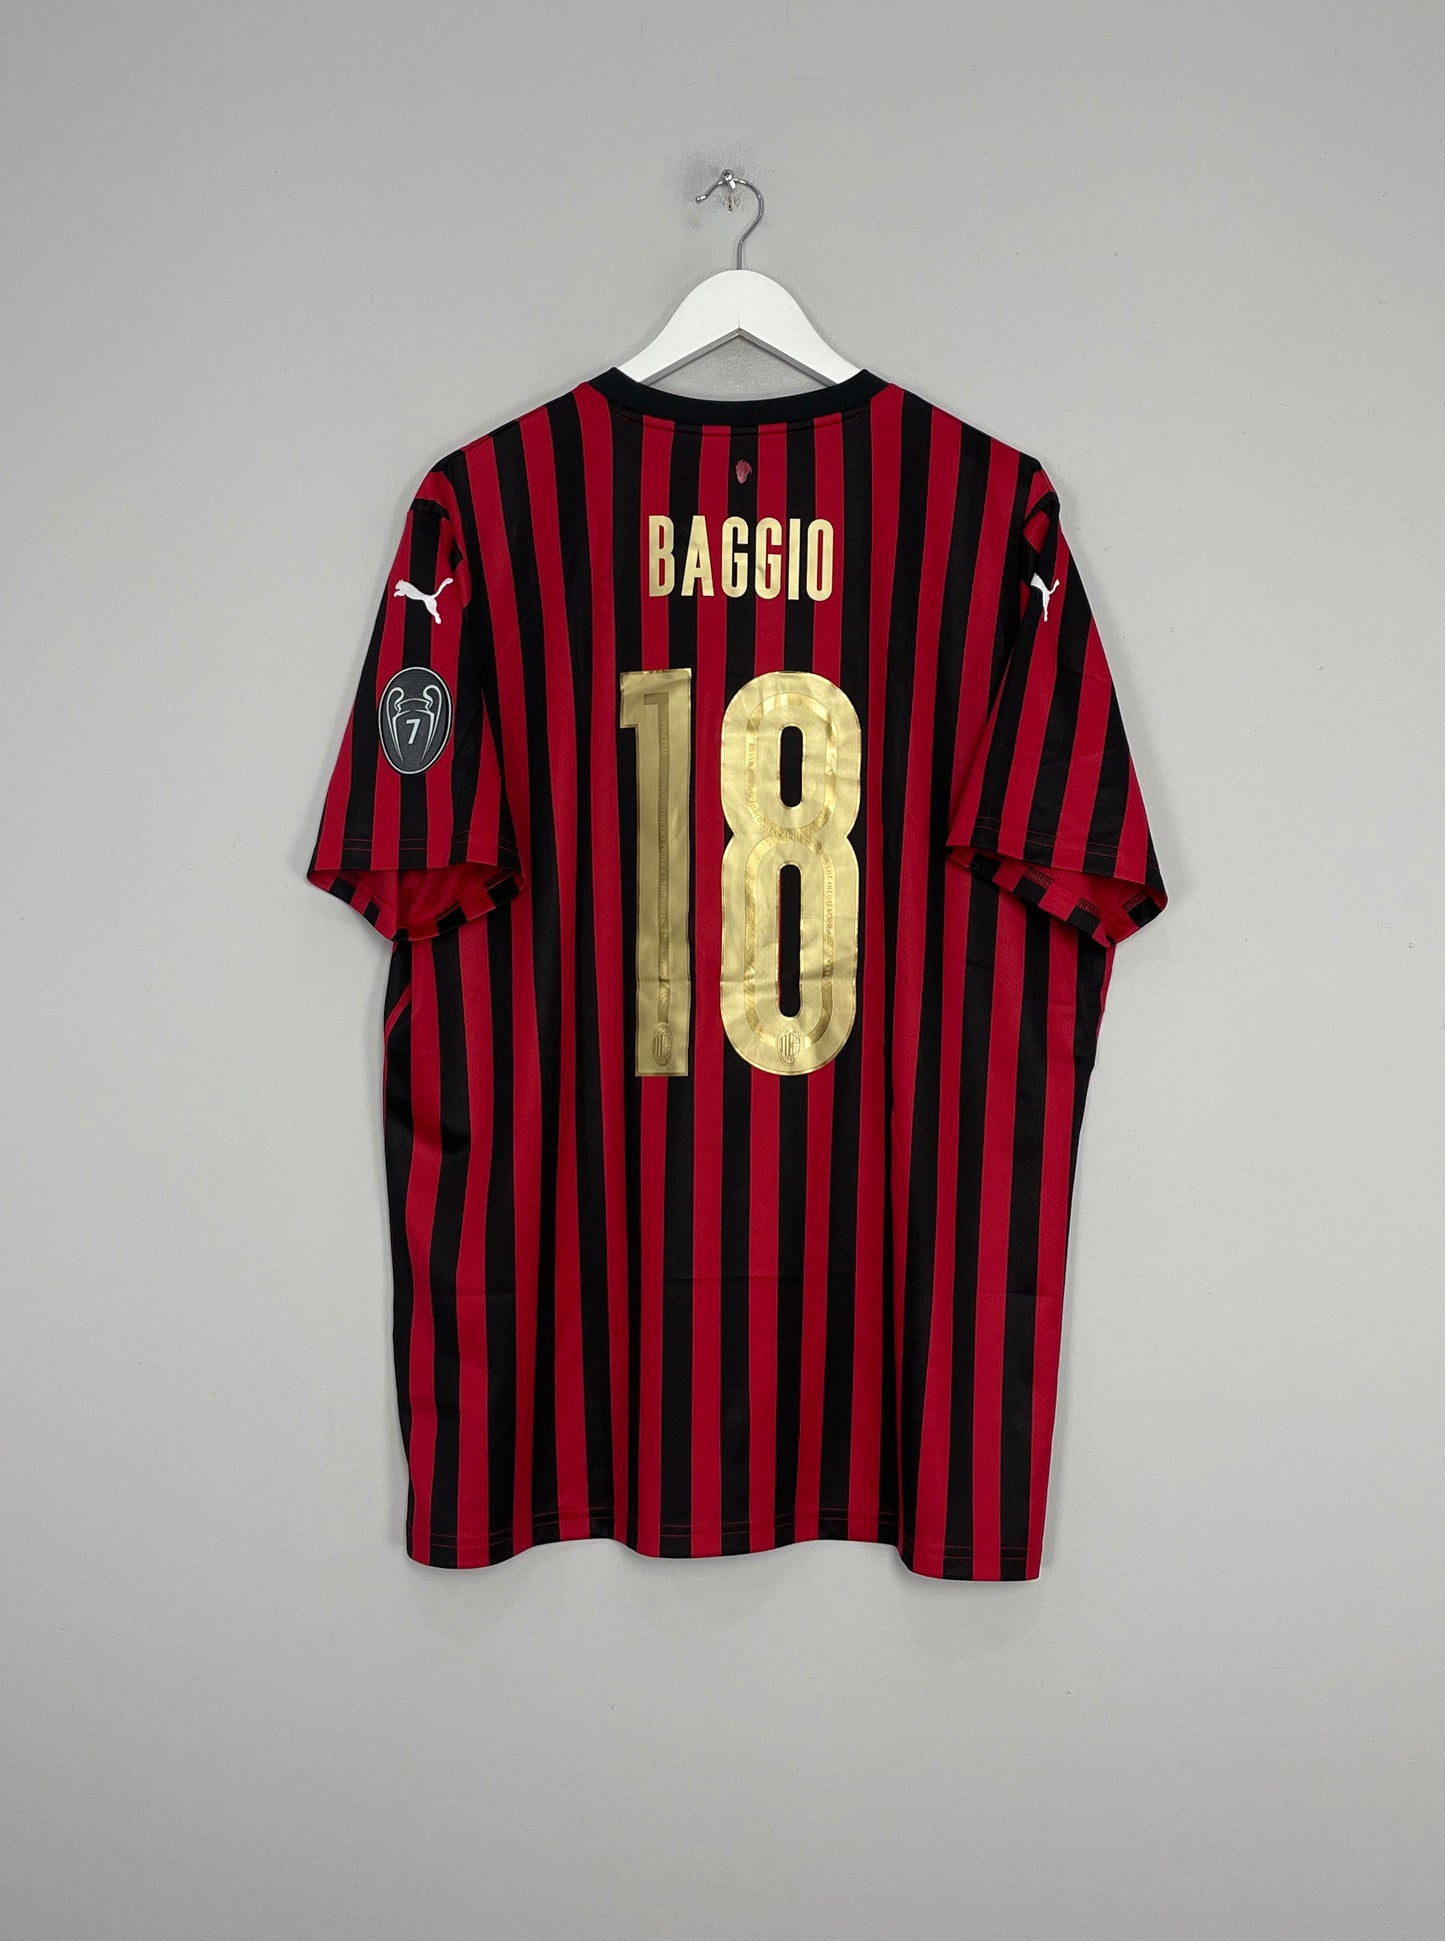 Image of the AC Milan Baggio shirt from the 2019/20 season